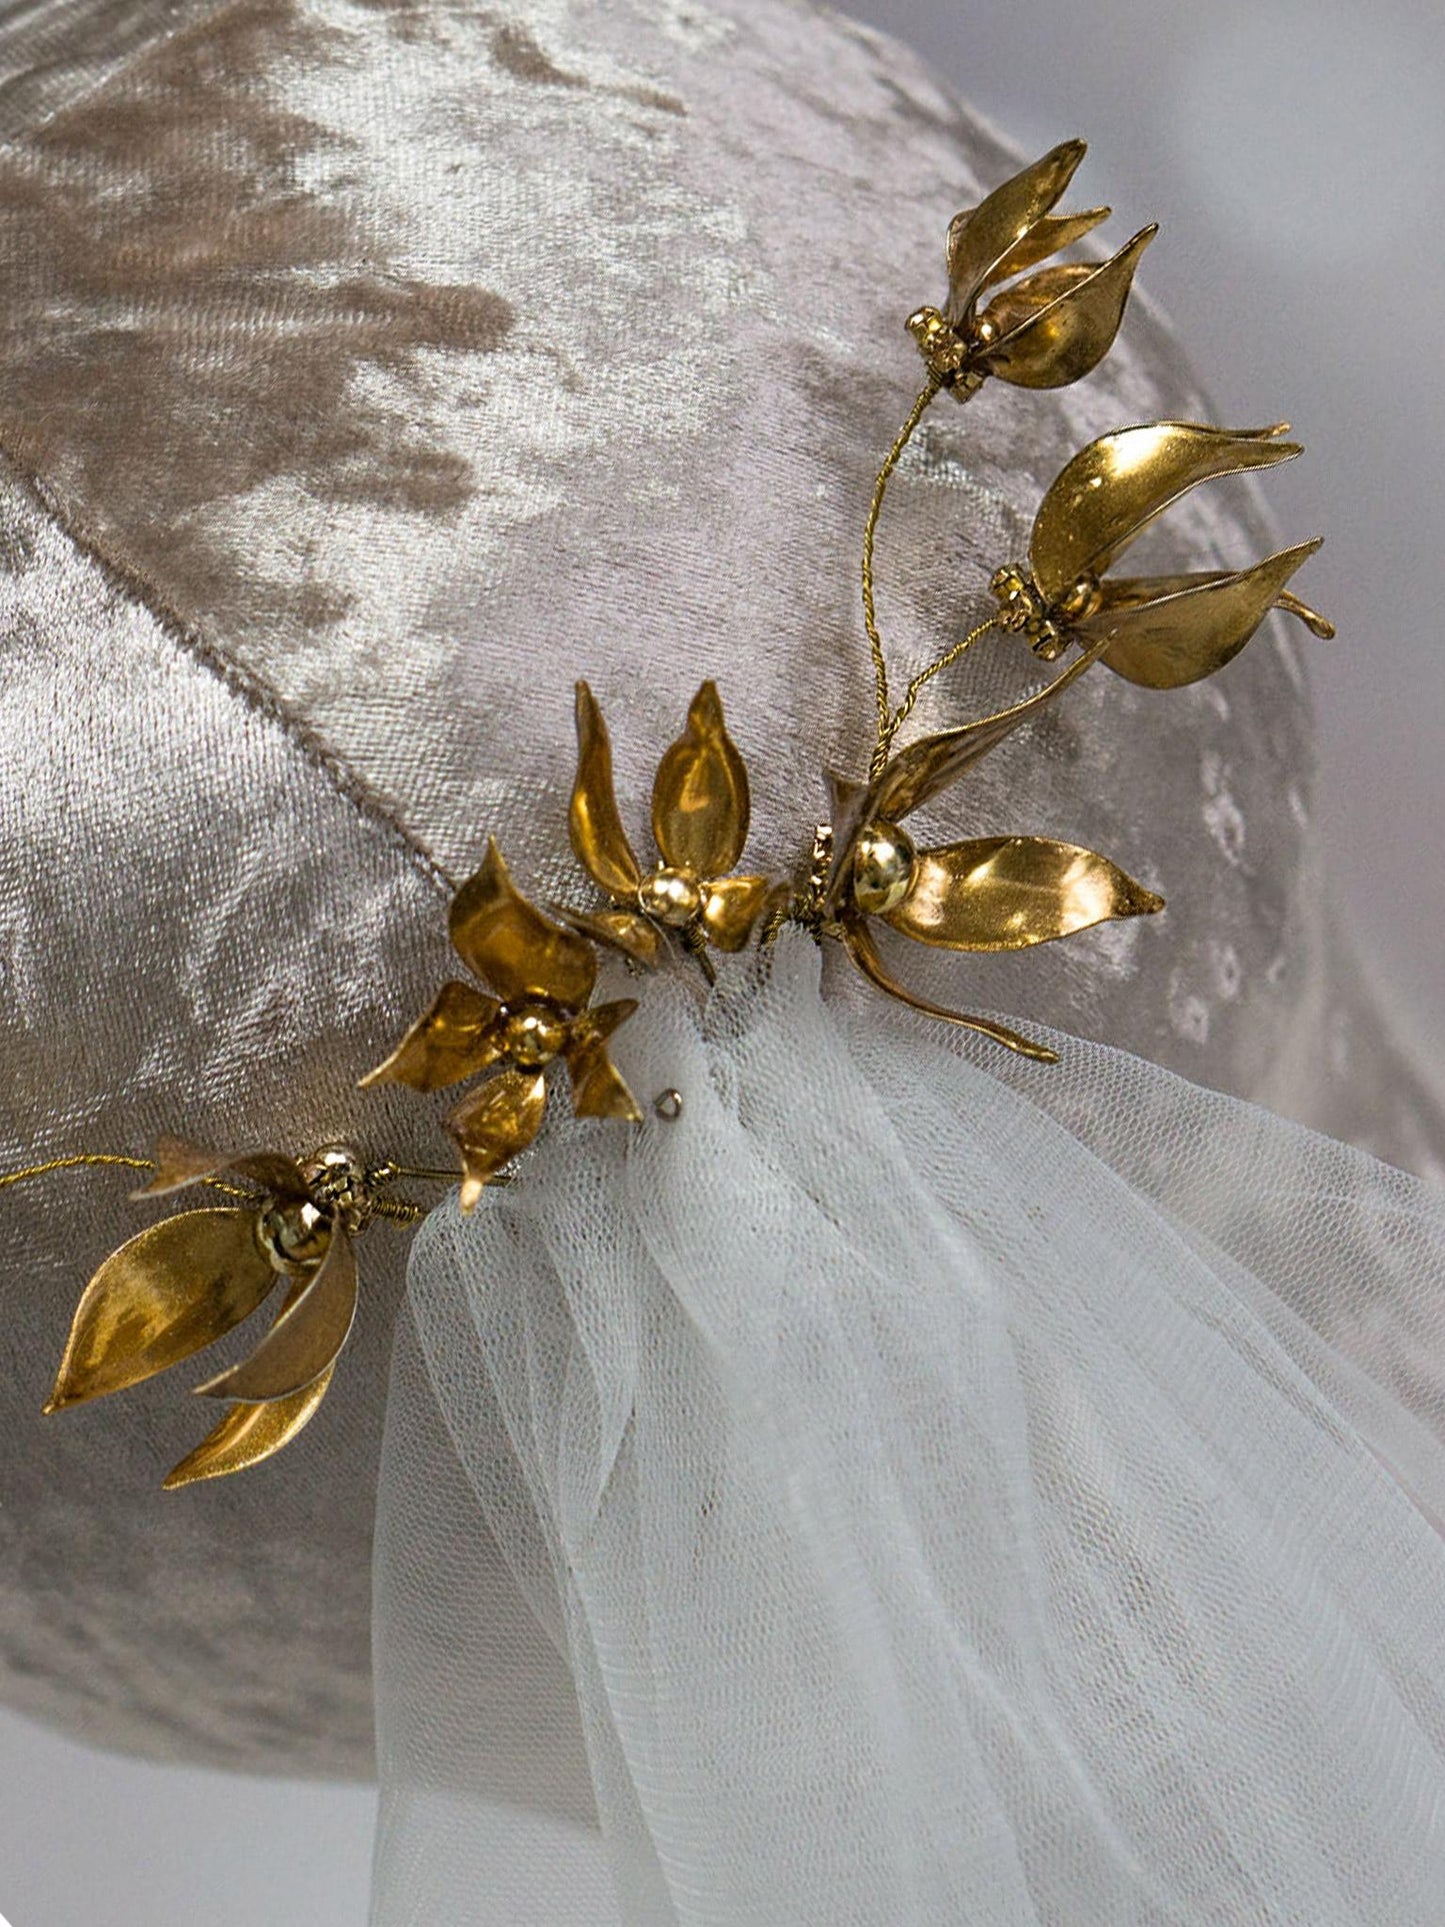 Set of Four Luxurious Golden Hair Accessories for Brides and Bridesmaids